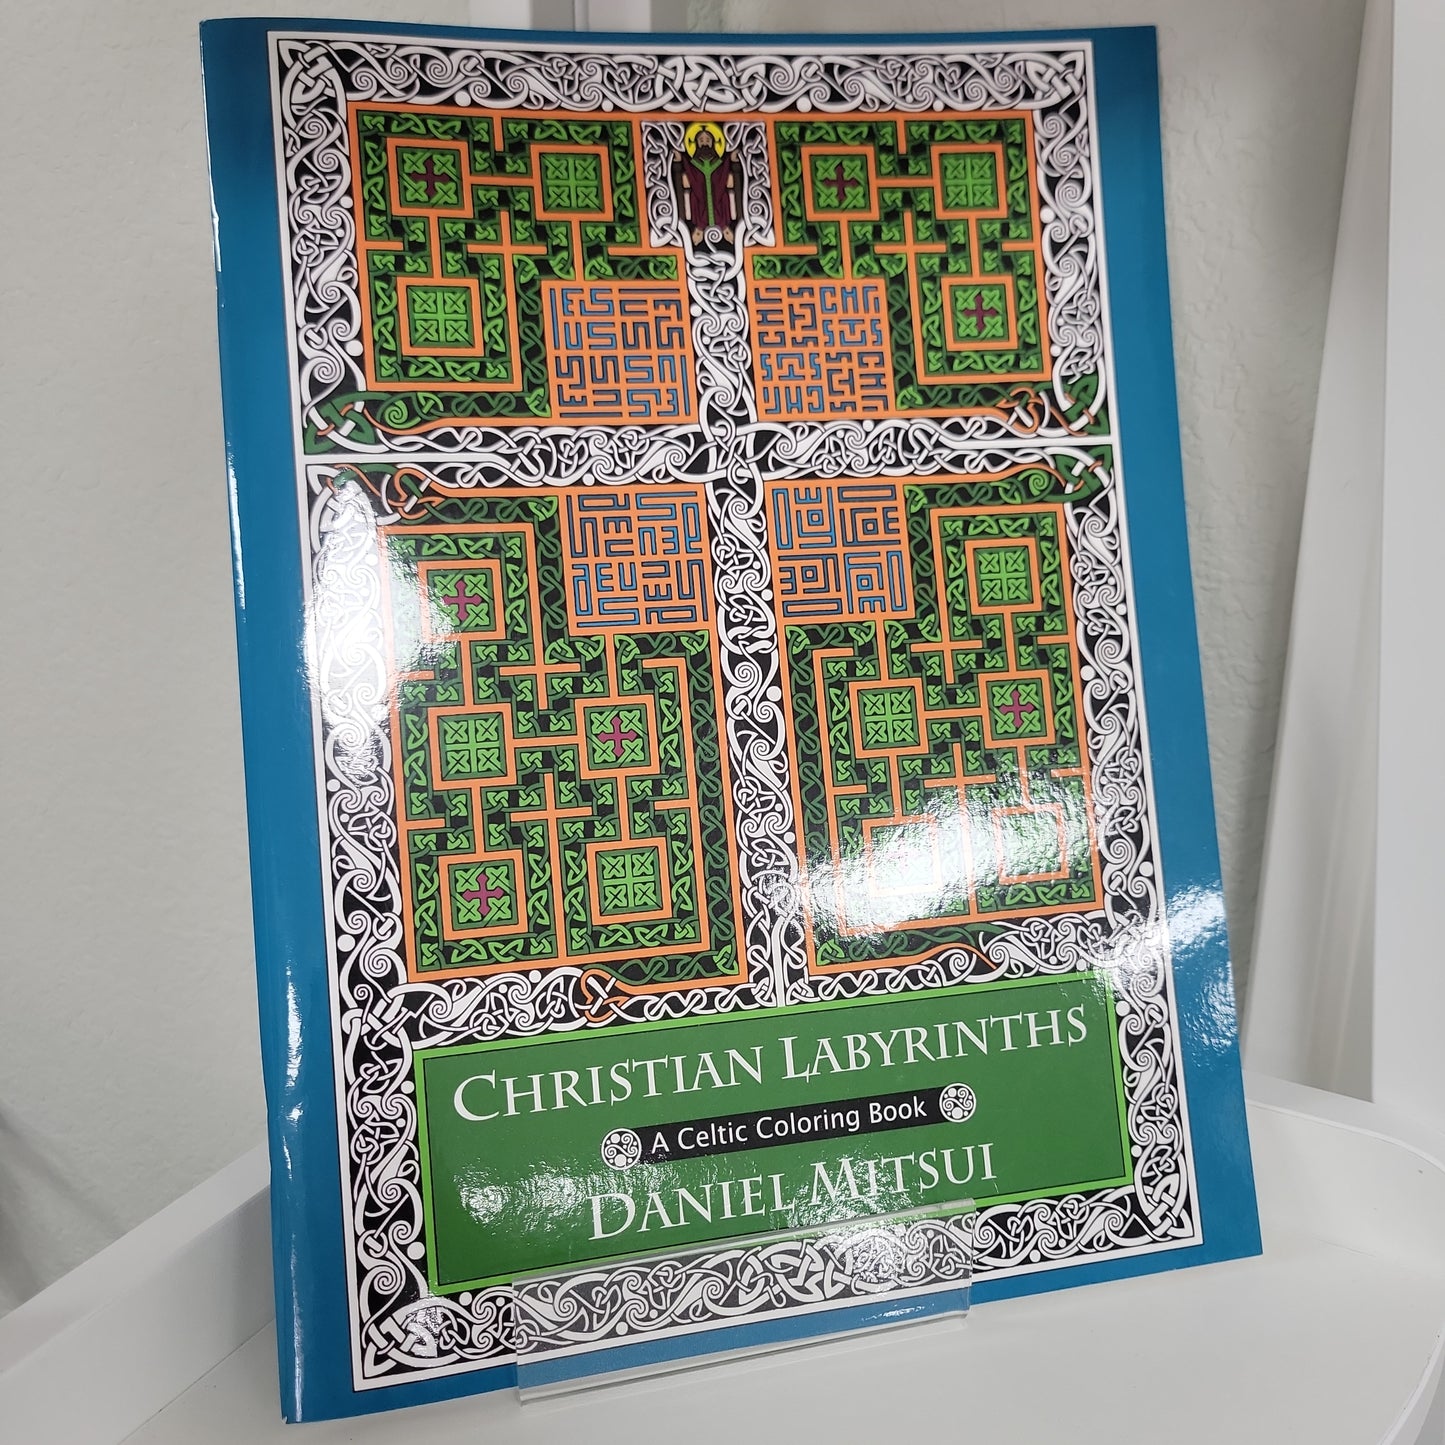 Christian Labyrinths Coloring Book